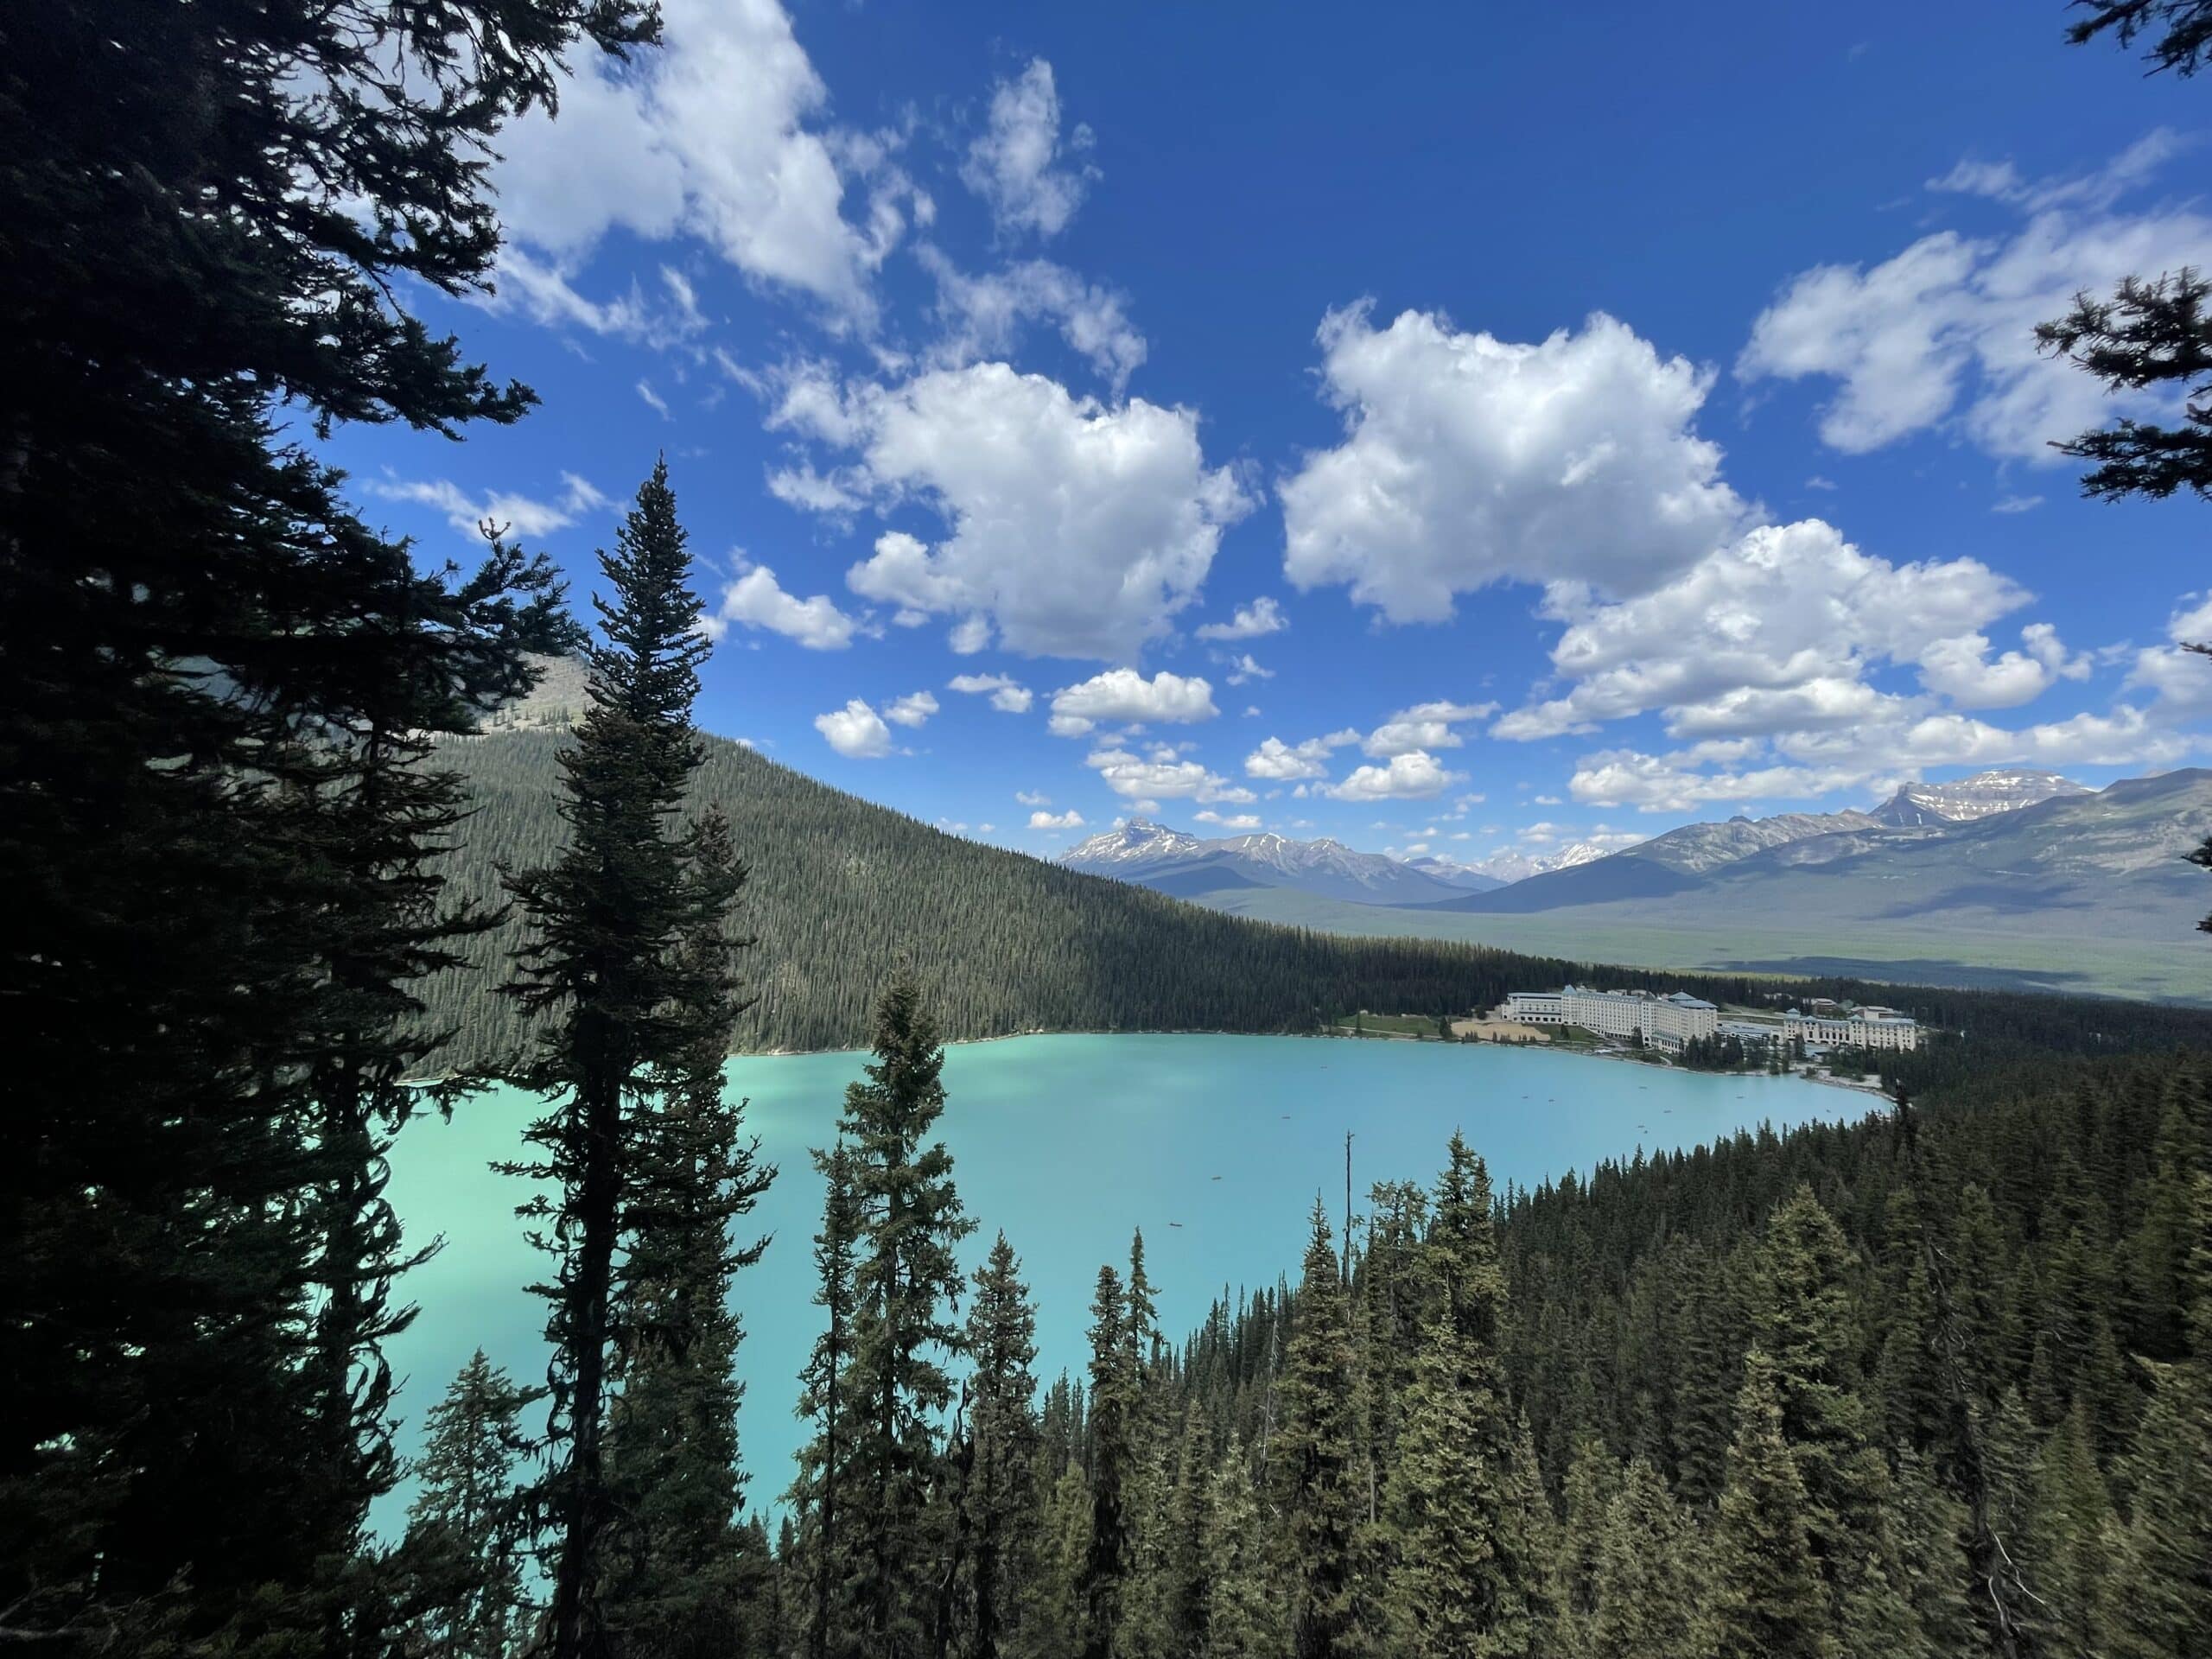 https://www.discovercanadatours.com/wp-content/uploads/2022/12/LakeLouise5-scaled.jpg